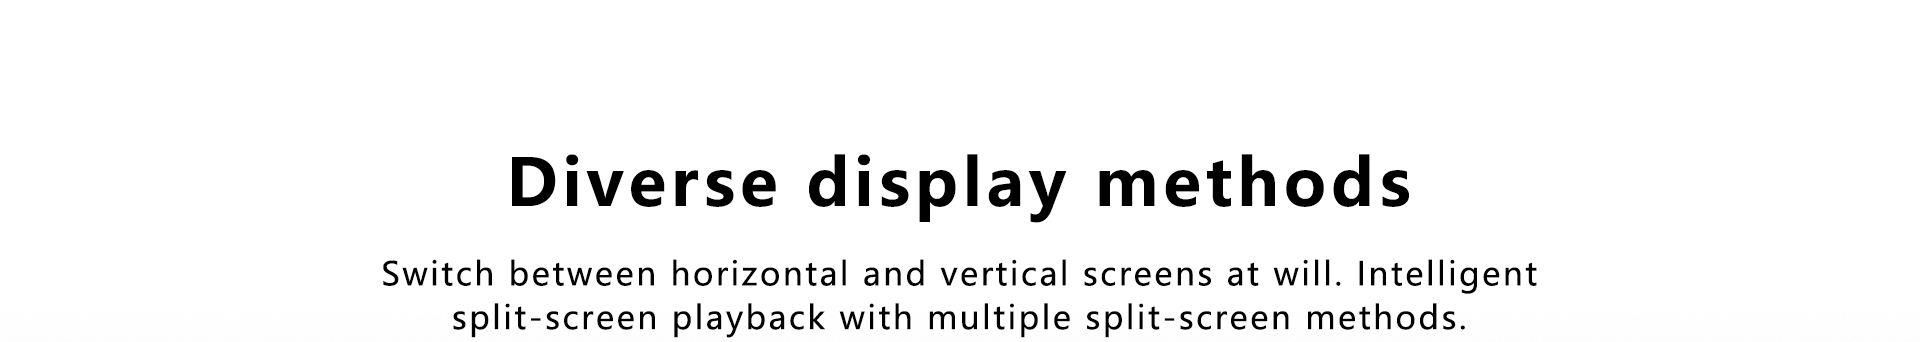 21.5 inch outdoor highlight 1500nit digital signage advertising machine